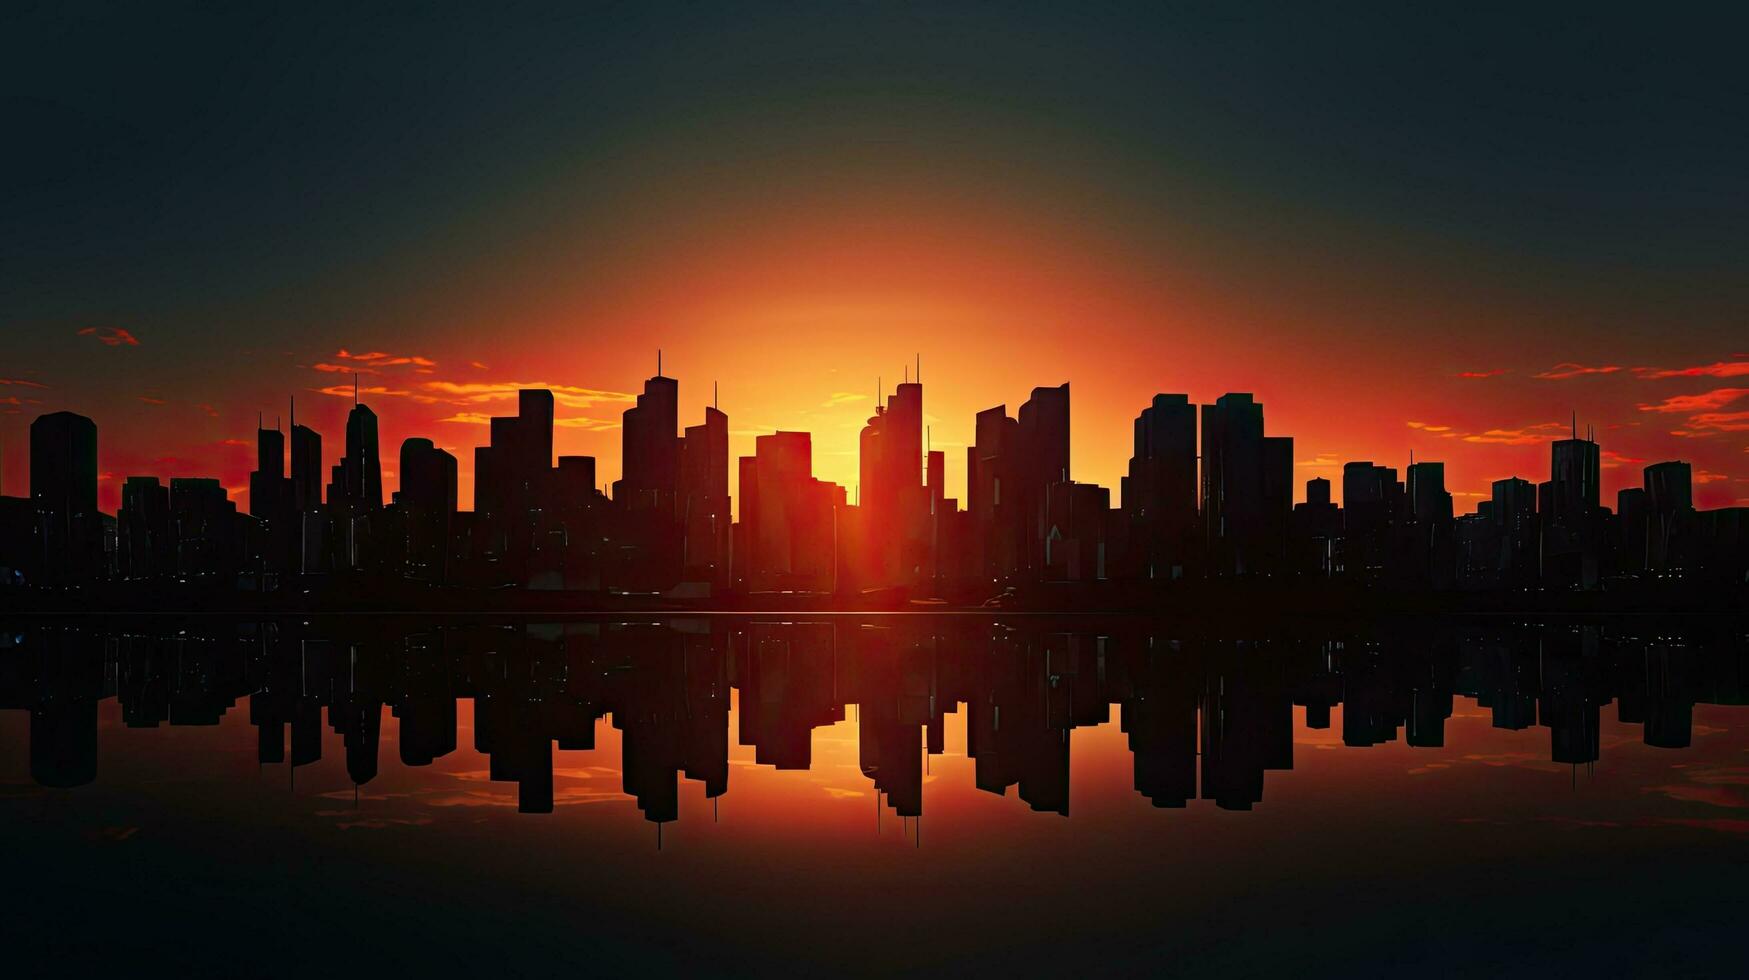 Tall building and city silhouettes at sunset photo